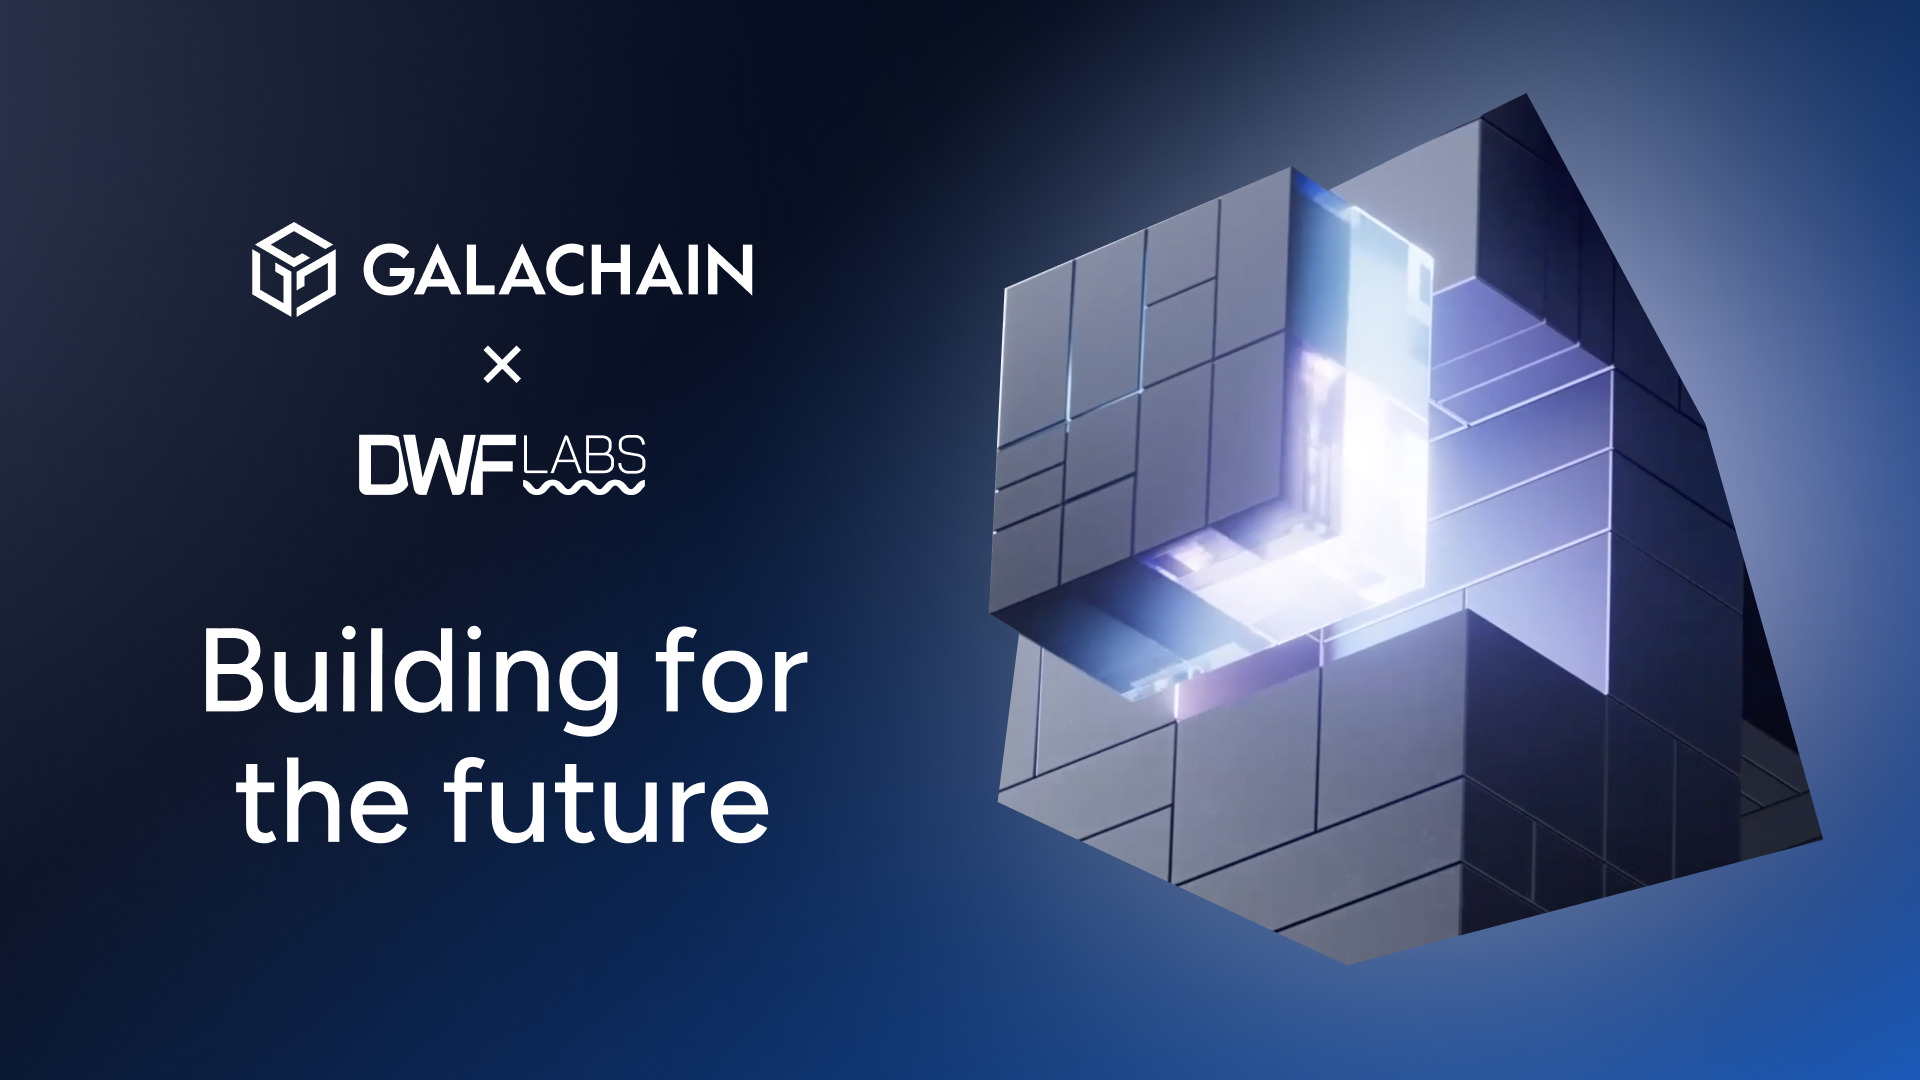 DWF and GalaChain are building for the future of the web3 world.